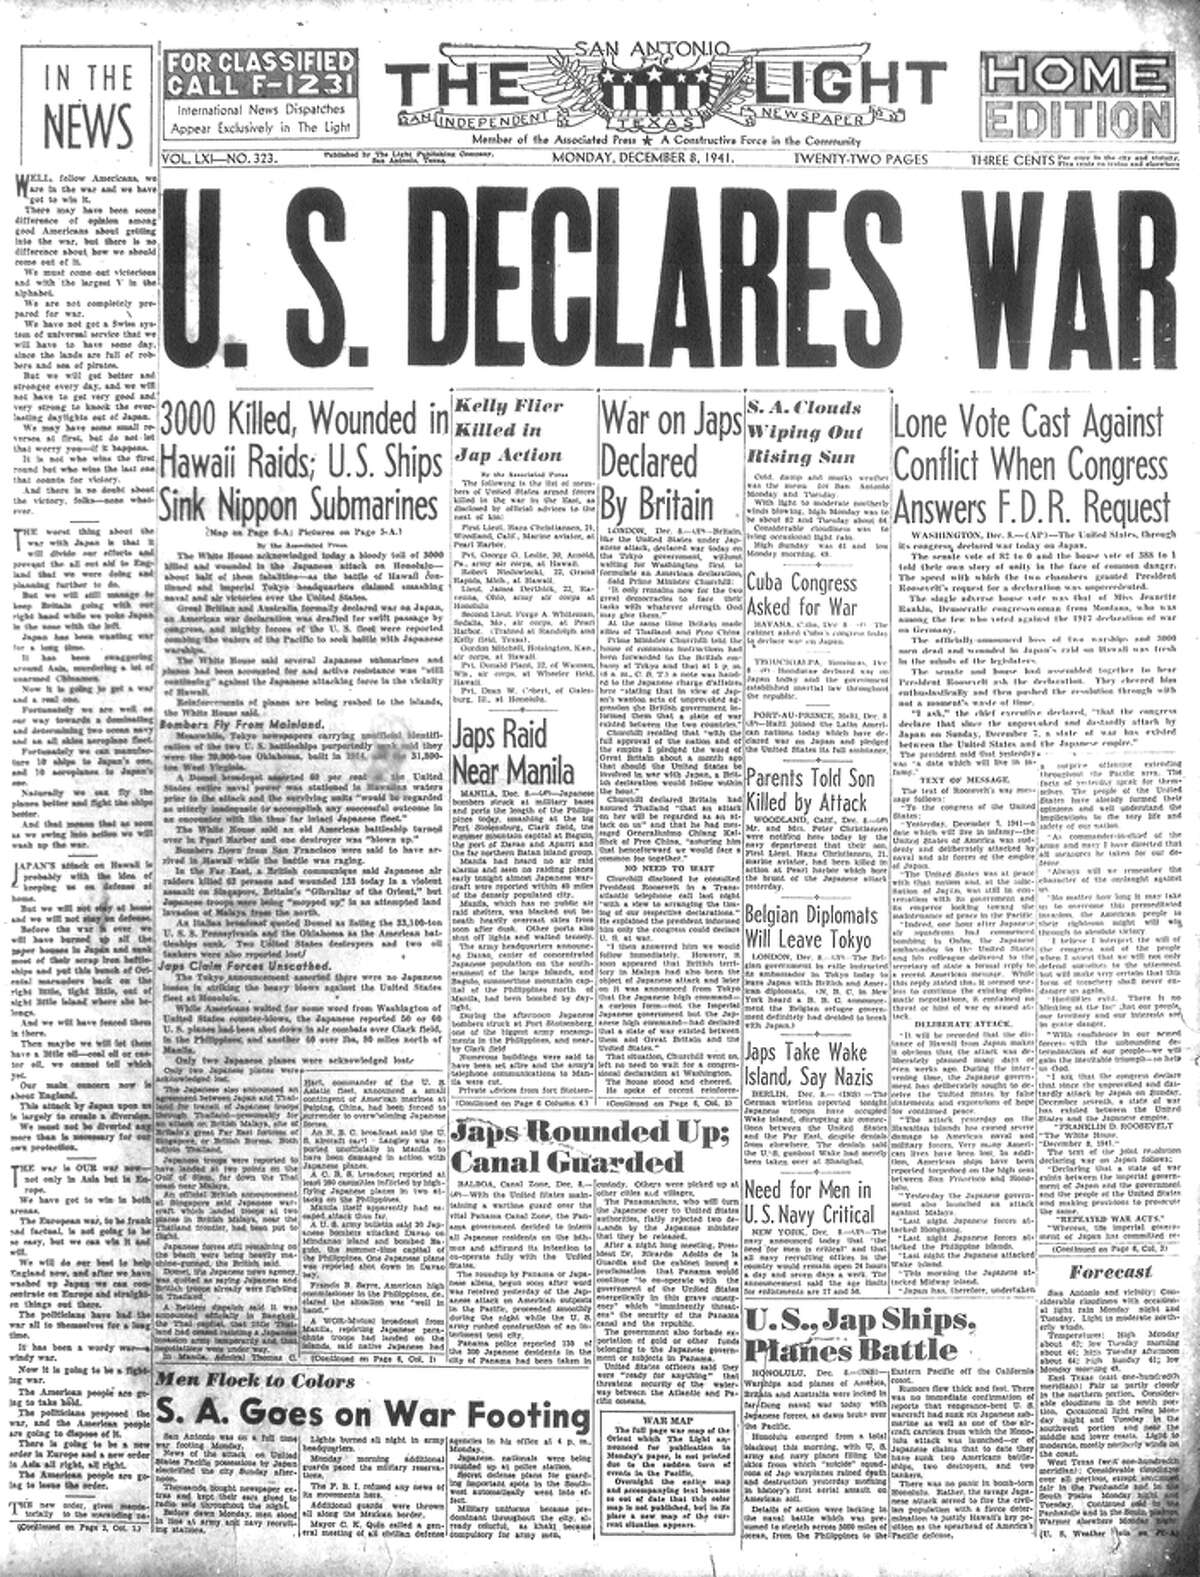 MONDAY, DEC. 8, 1941: After Japan attacks Pearl Harbor, killing more than 2,400, the United States declares war, officially entering World War II. In San Antonio, the Light reports, "before dawn Monday, men stood in line at Army and Navy recruitment stations."